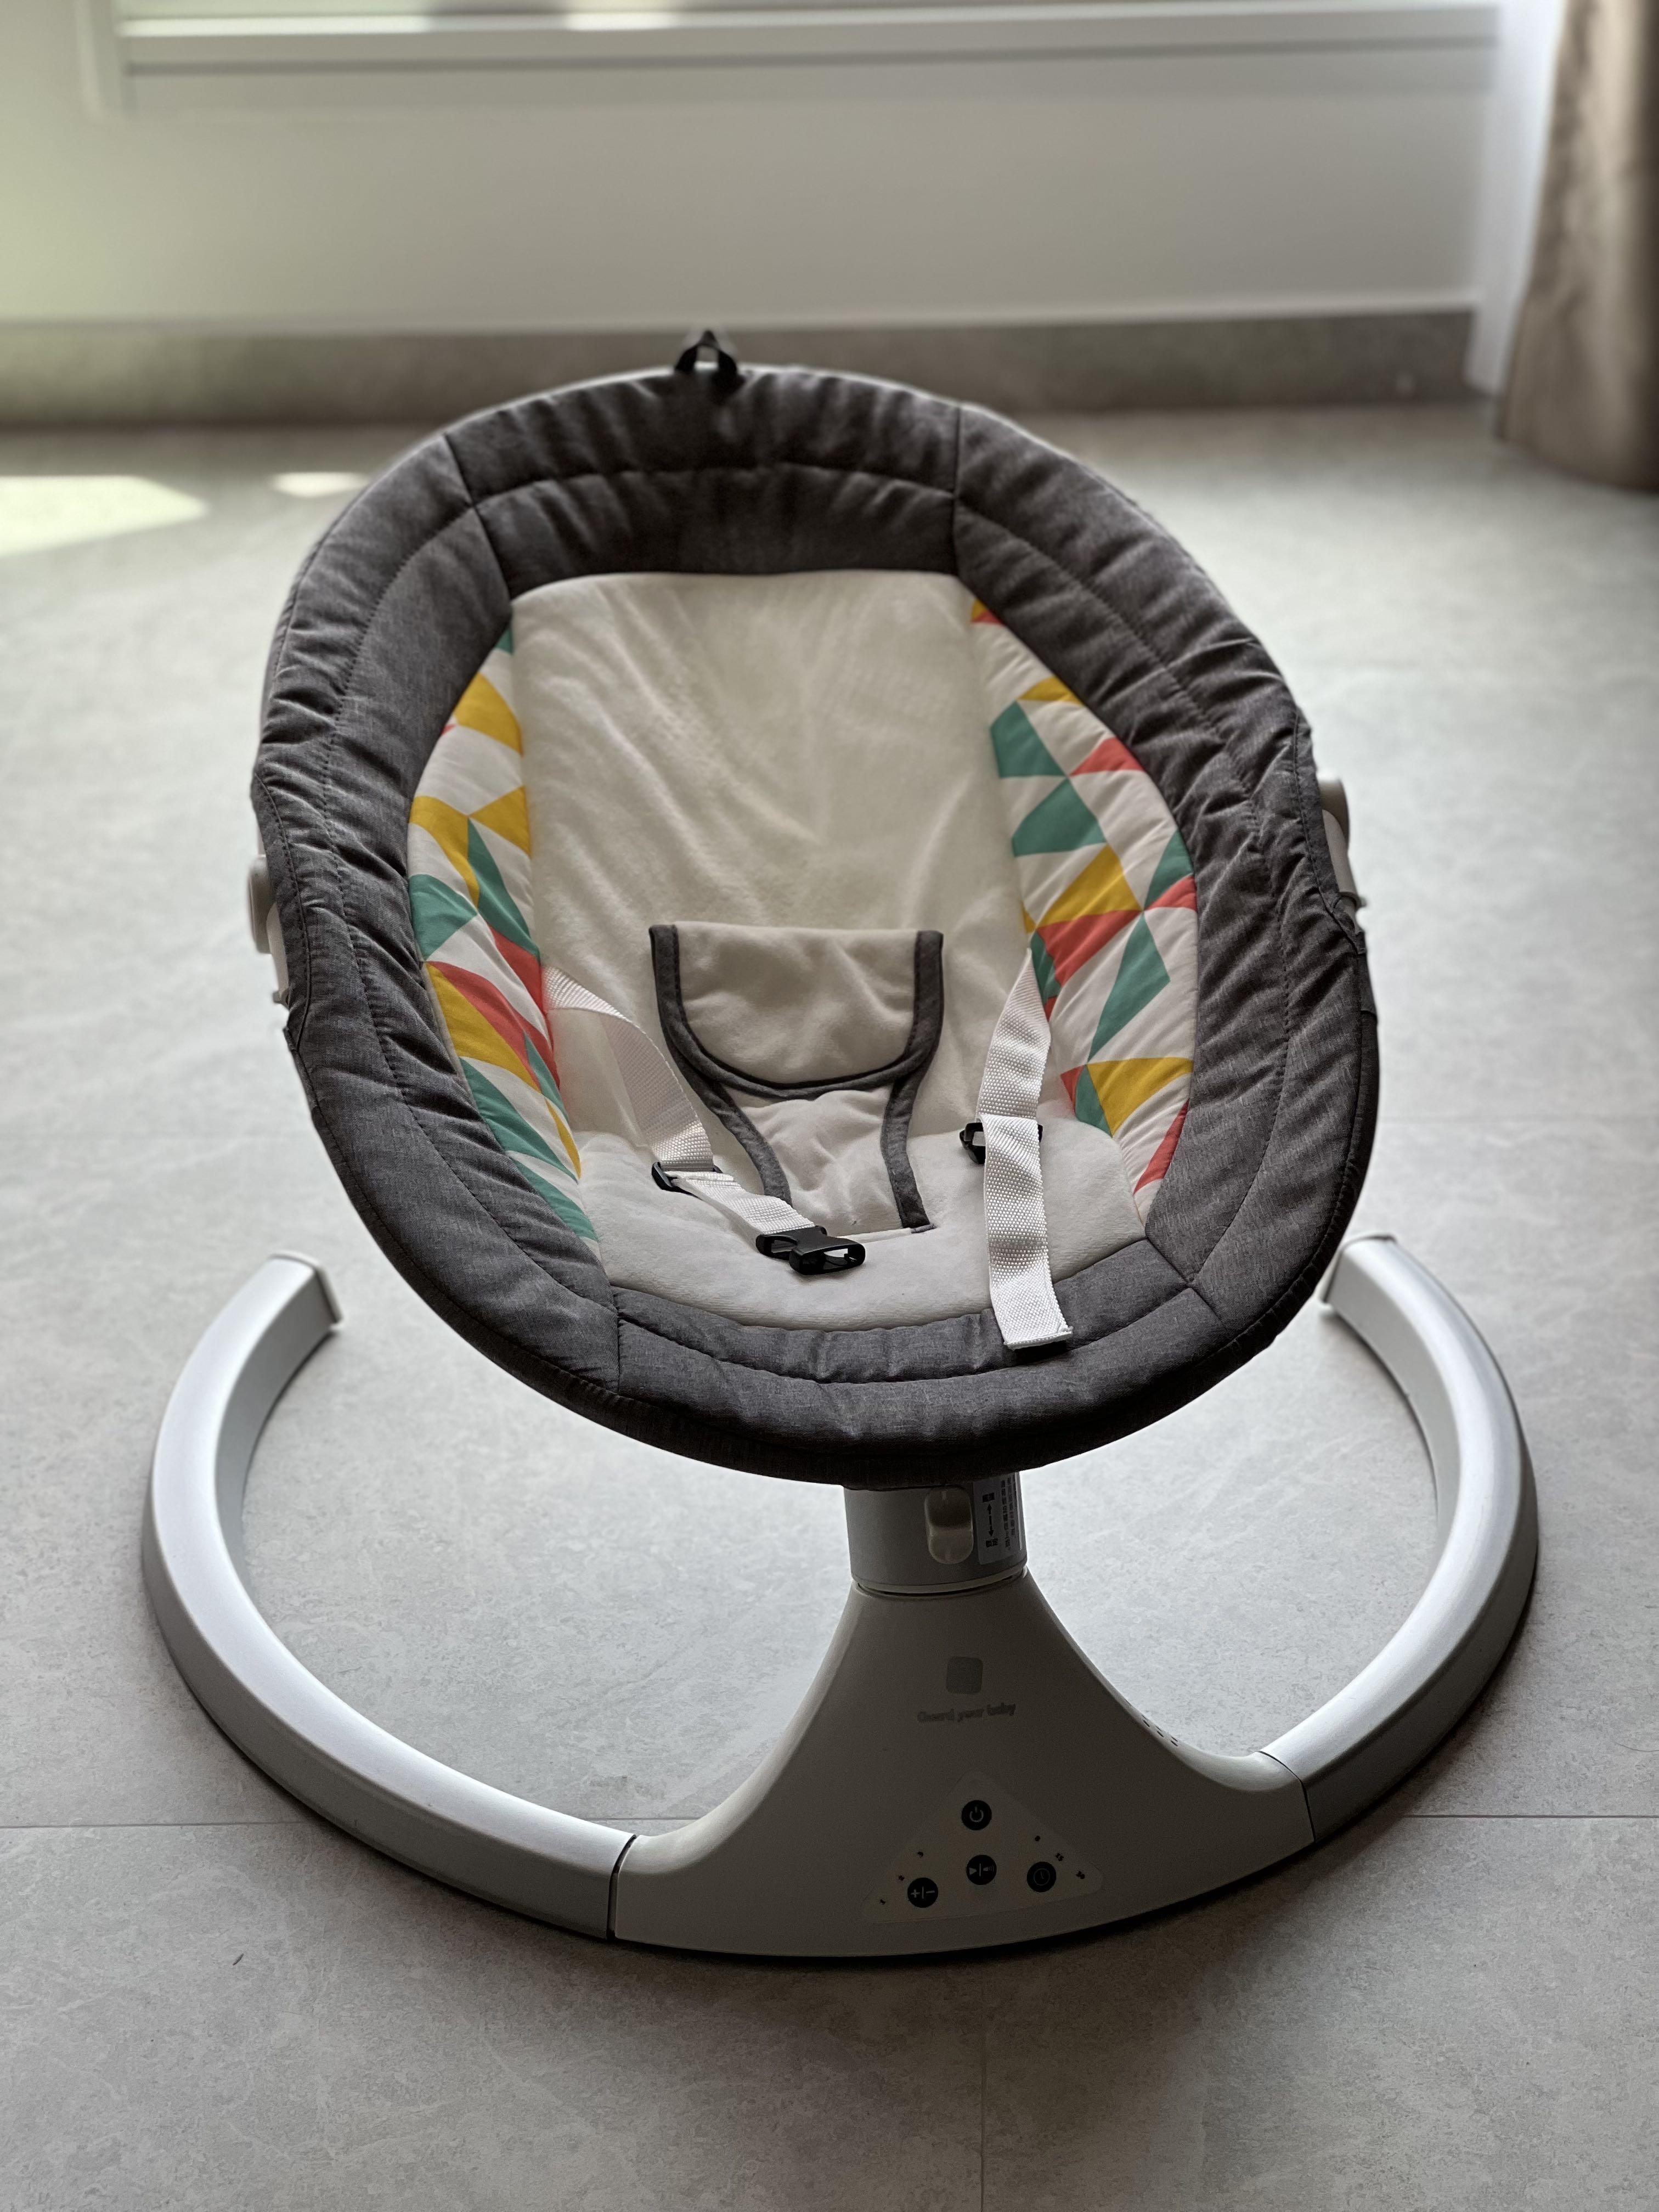 ELECTRIC Baby rocker / bouncer / chair / bed, Babies & Kids, Baby ...